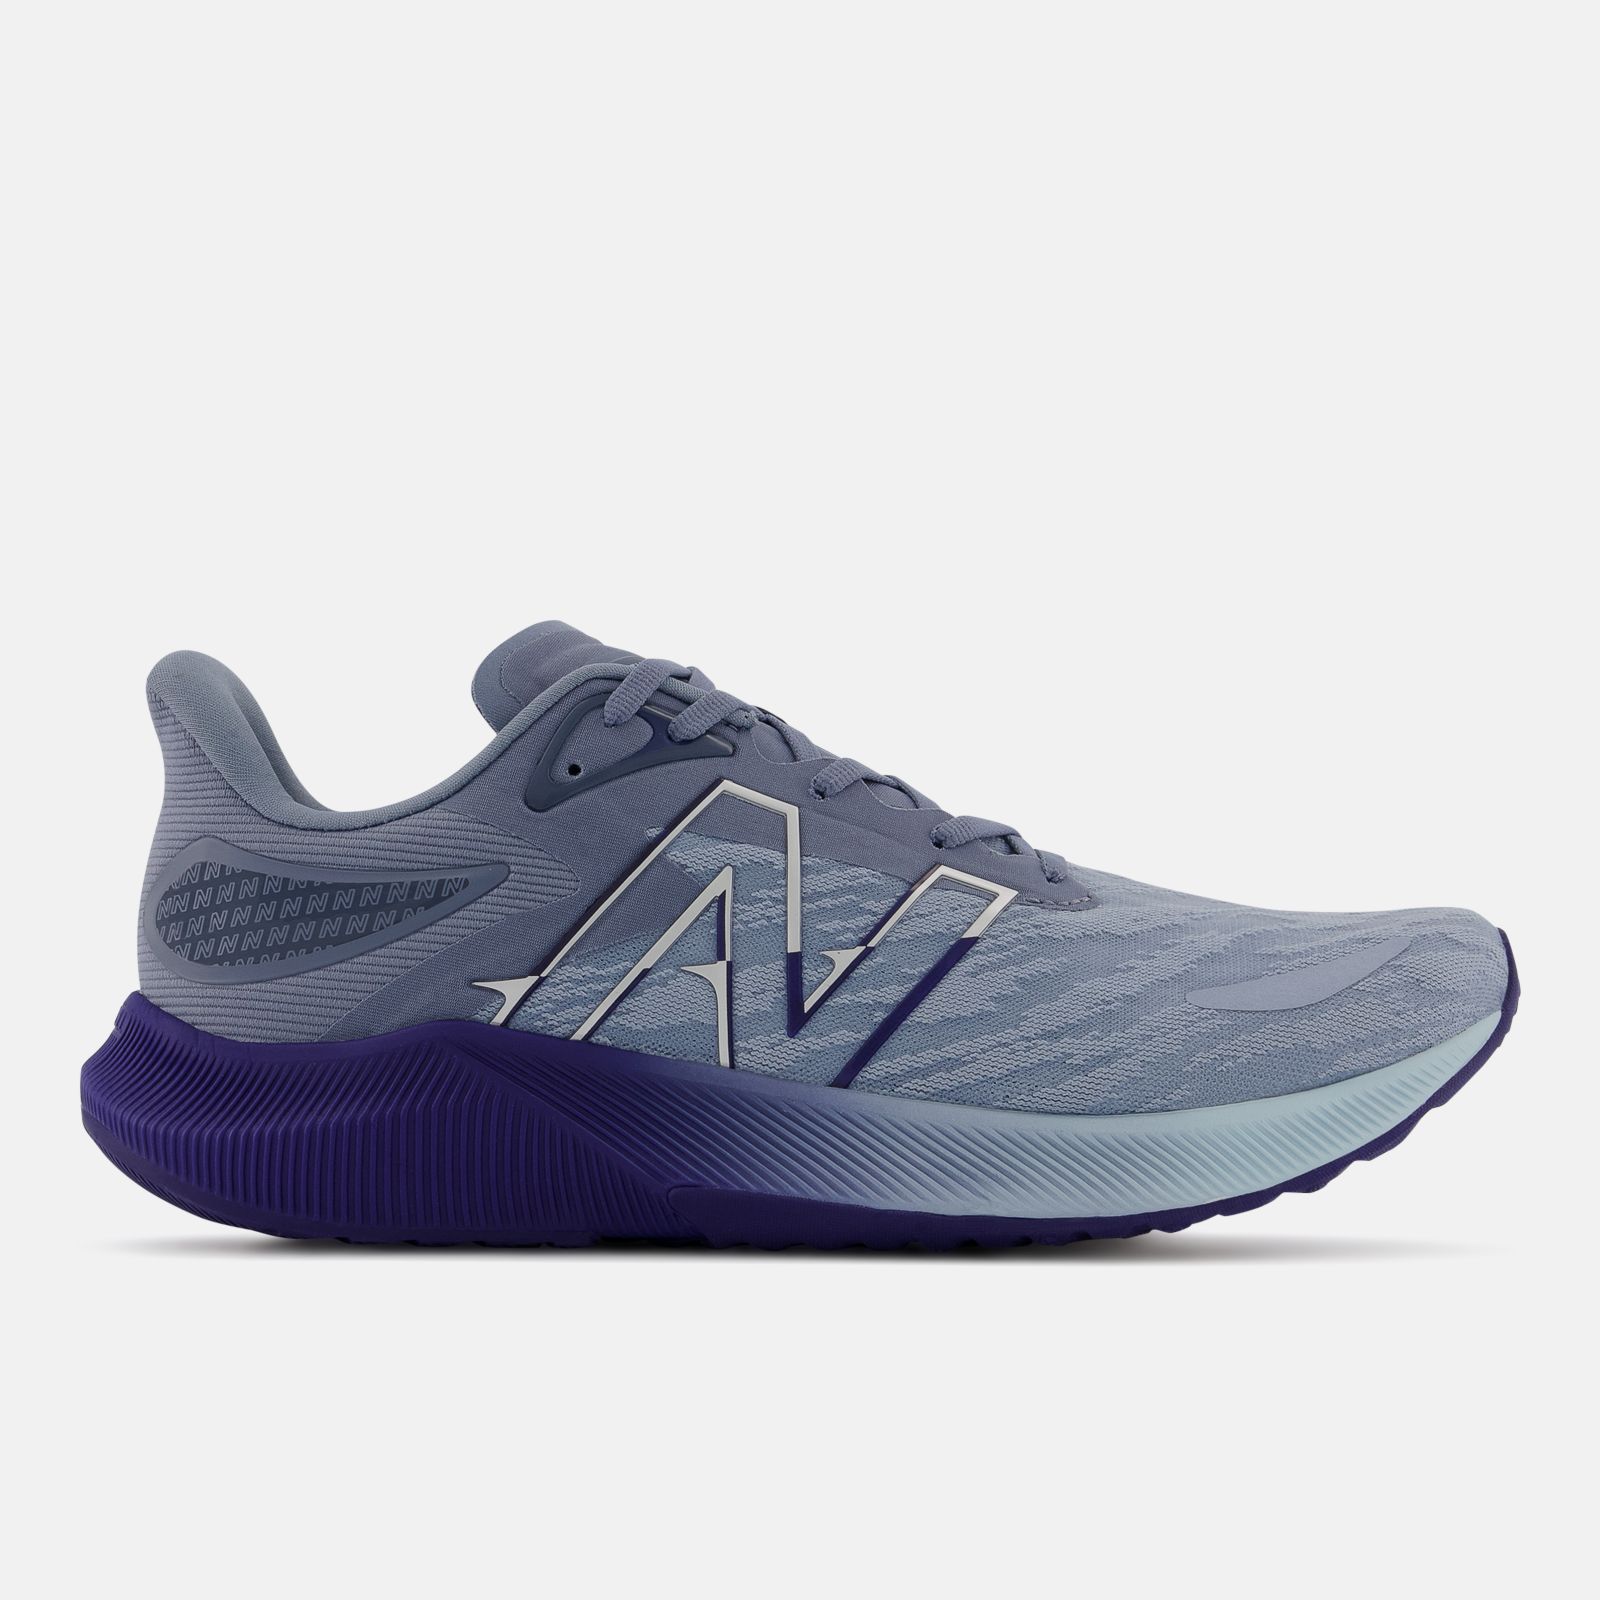 New Balance MFCPRCG3, Blue, large